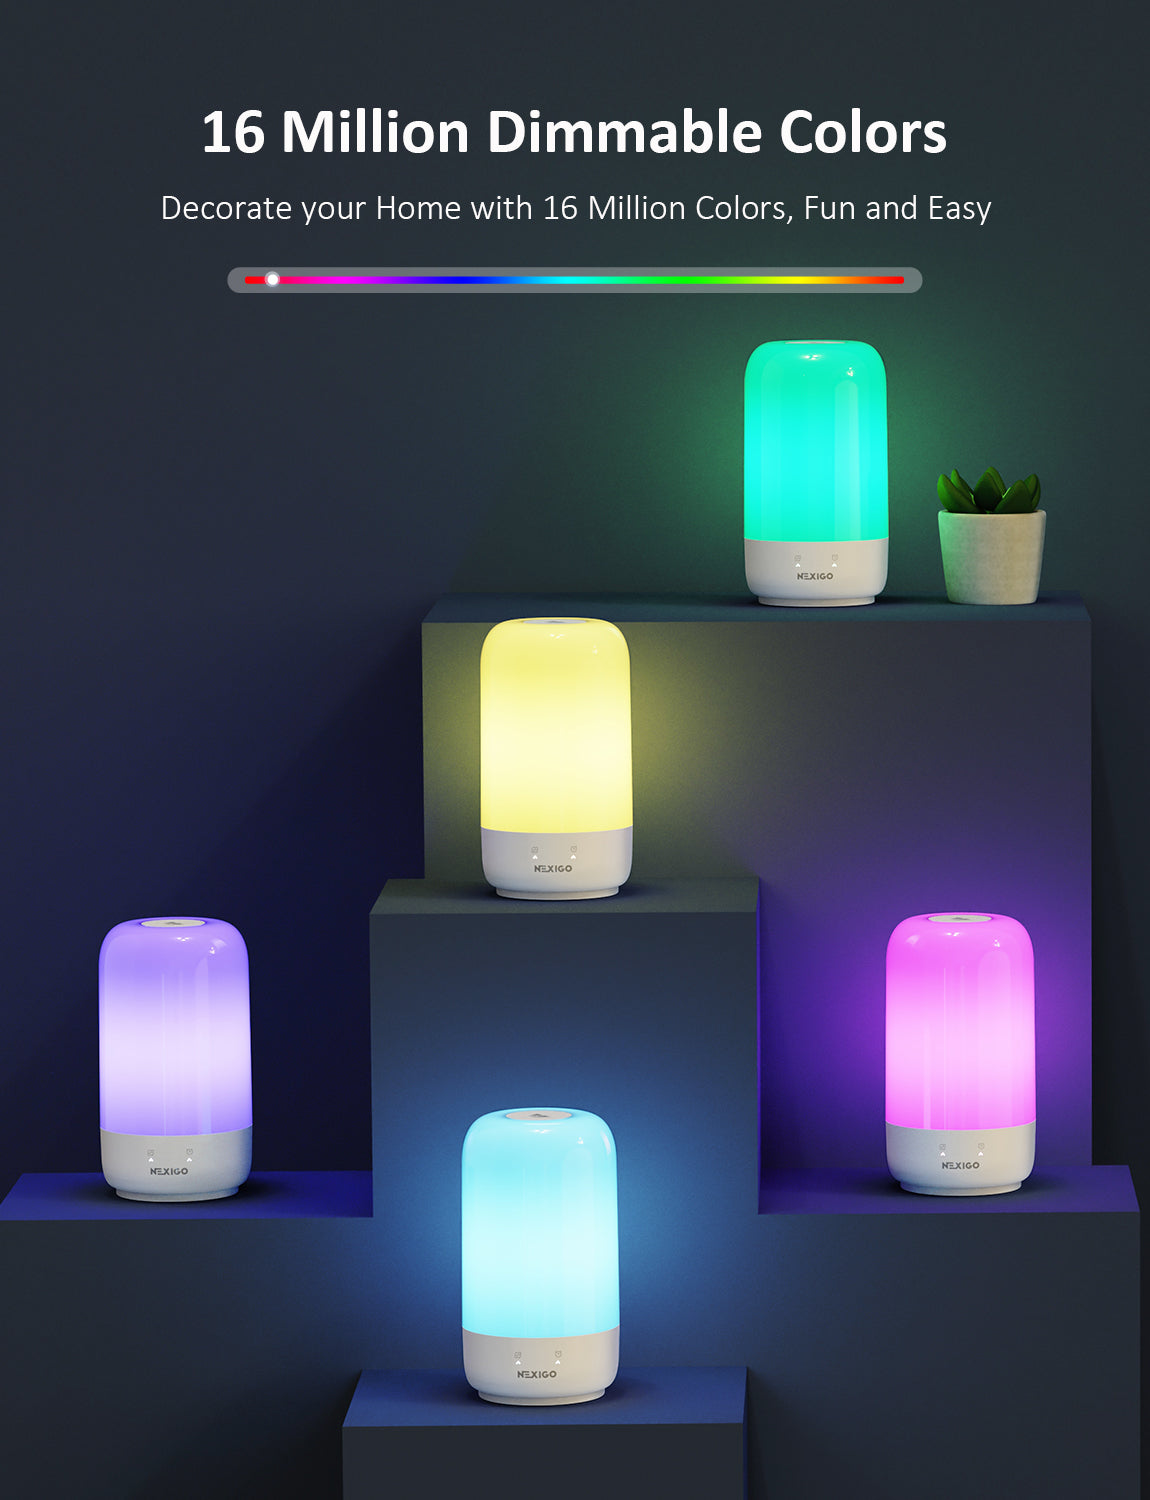 Image showcases smart desk lamp with adjustable colors.